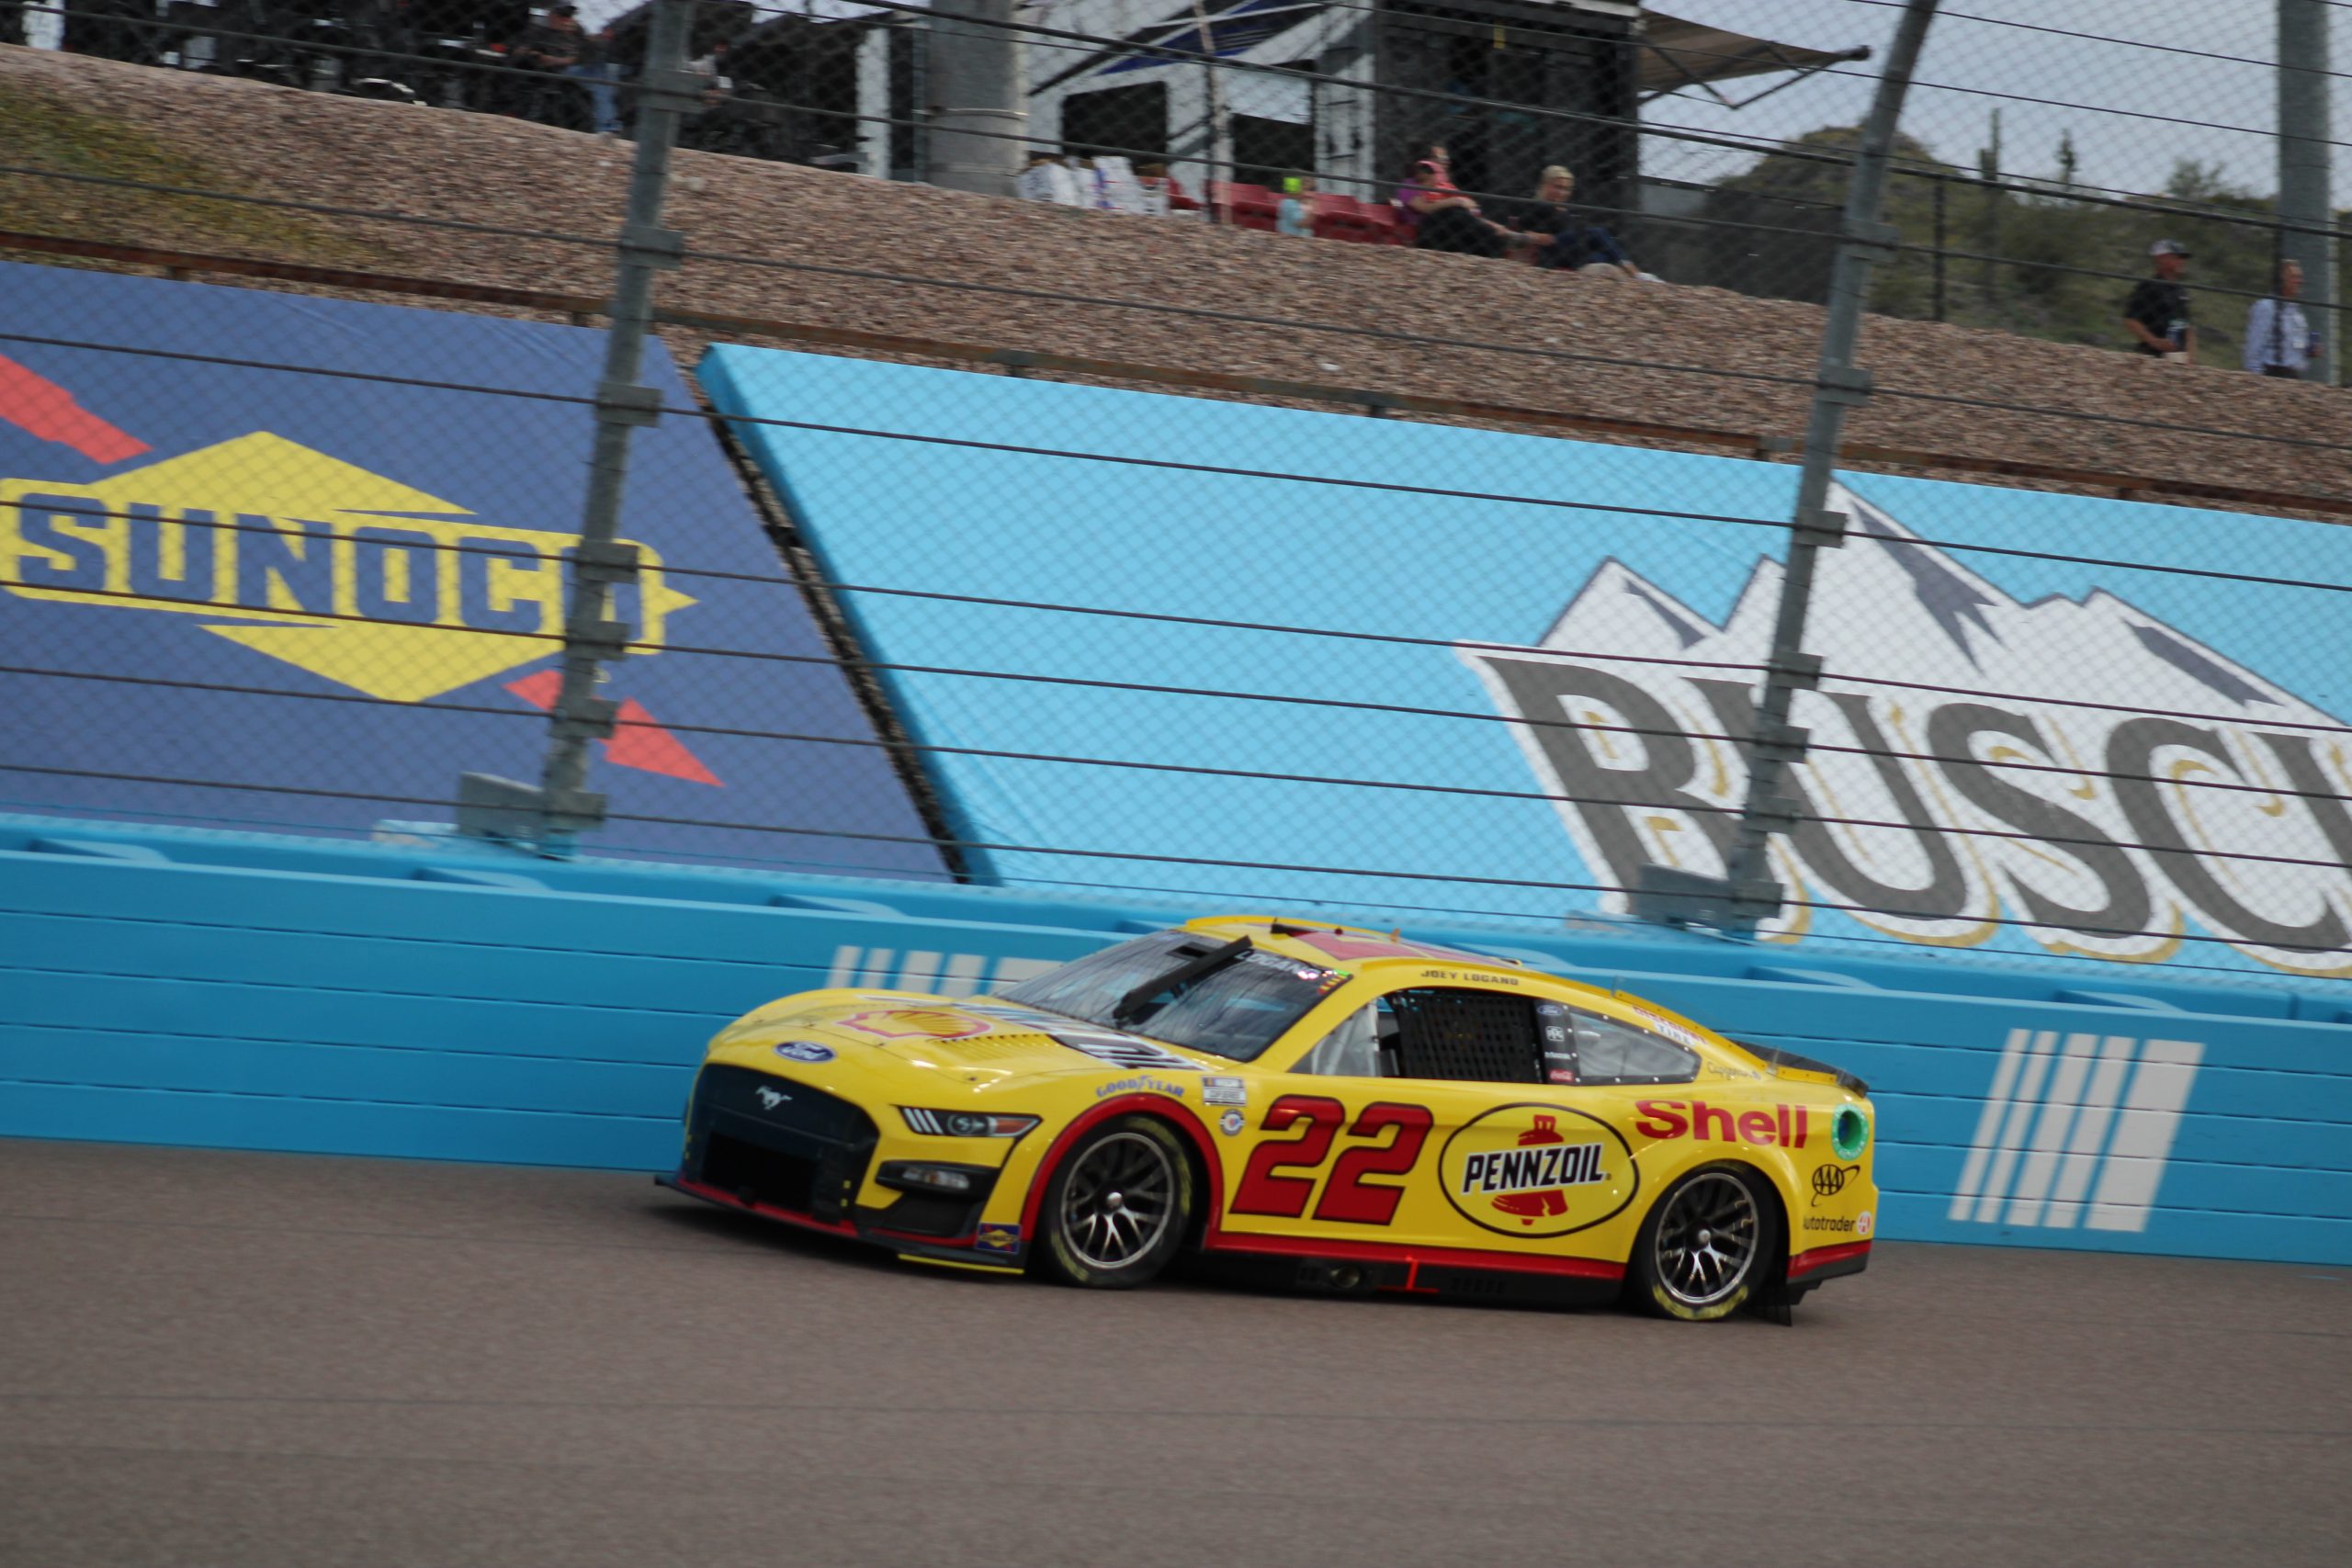 Logano hope to find his car's quick pace from Friday's 50-minute practice session. (Photo: Michael Donohue | The Podium Finish)